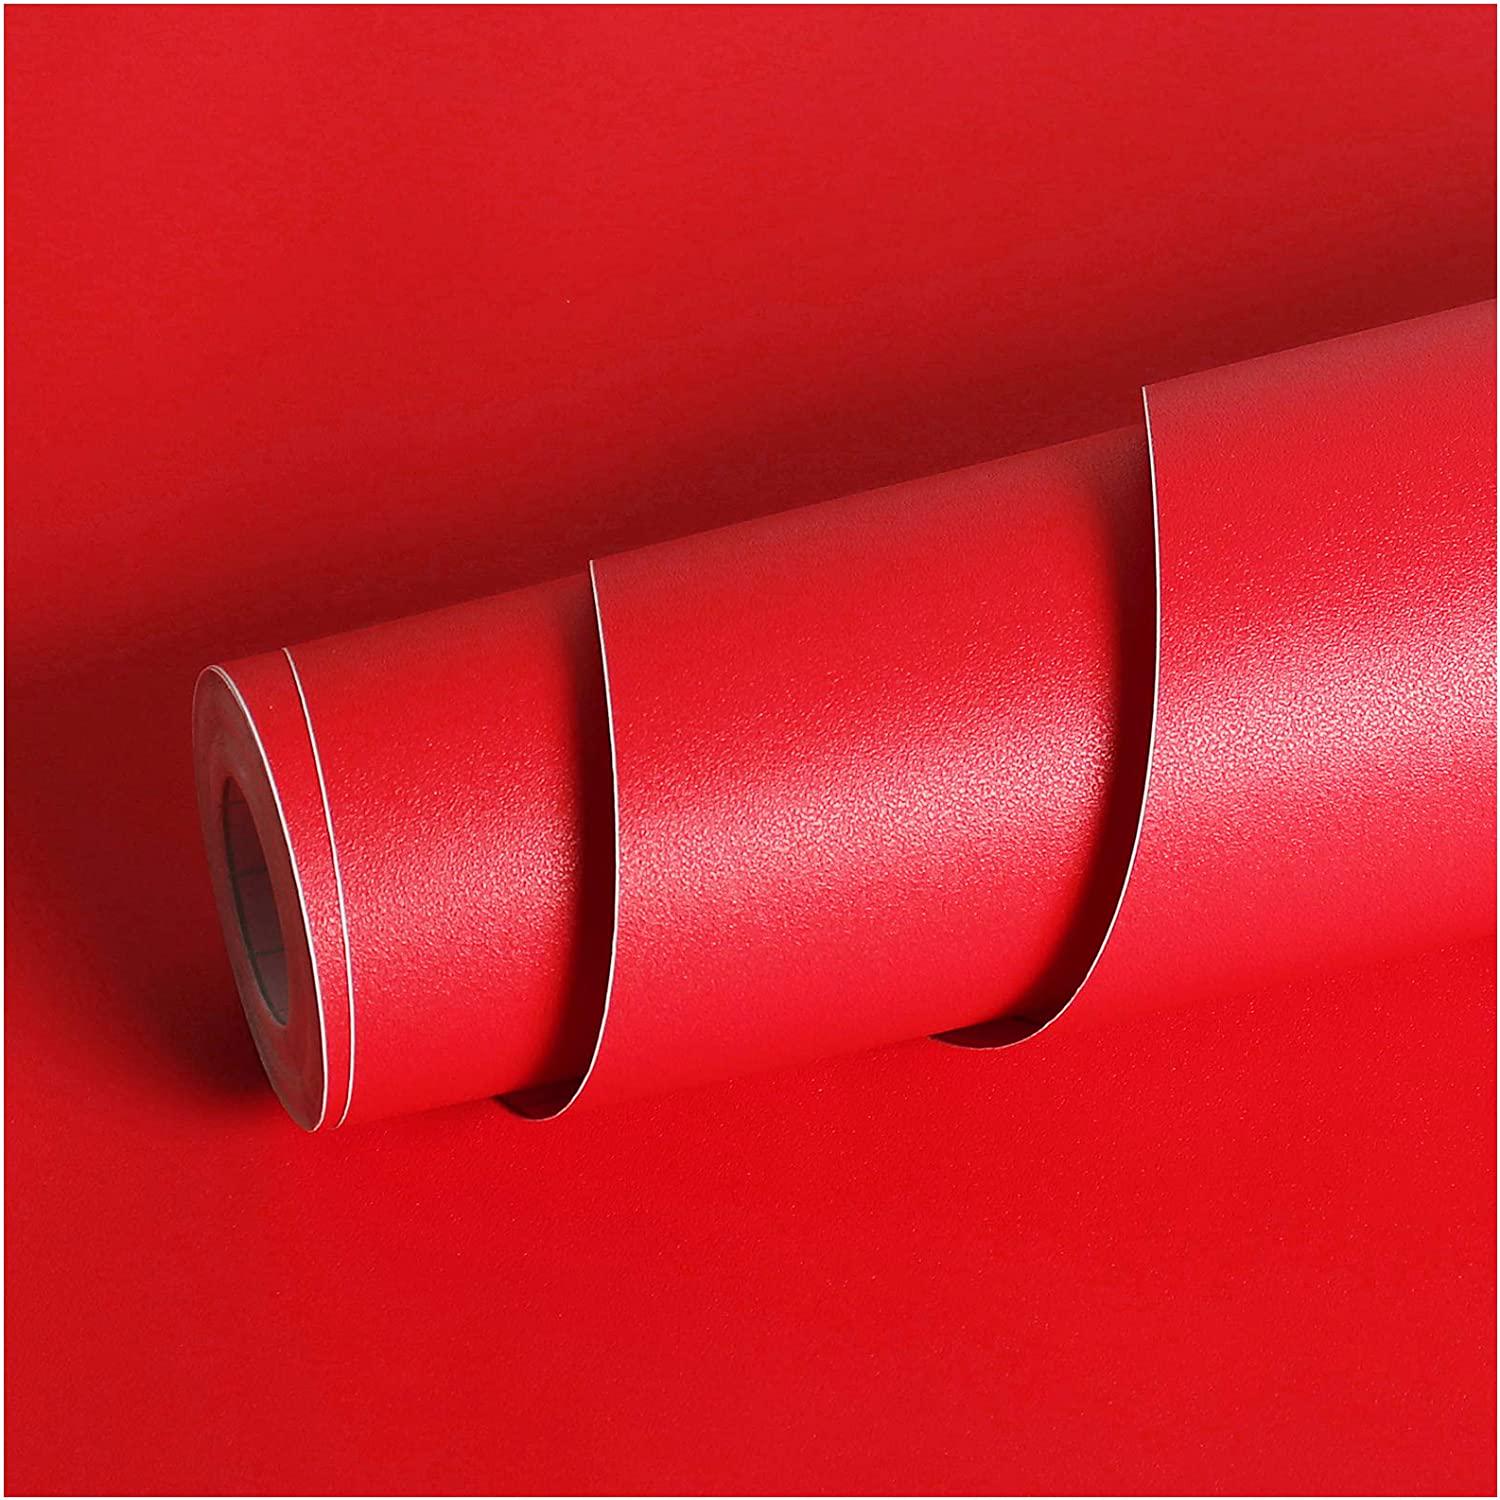 Livelynine, Livelynine 15.8 x197 Removable Red Contact Paper for Cabinets Self Adhesive Vinyl Wallpaper Peel and Stick Countertop Covers Stick On Wall Paper Decorations for Living Room Bedroom Wall Decorations